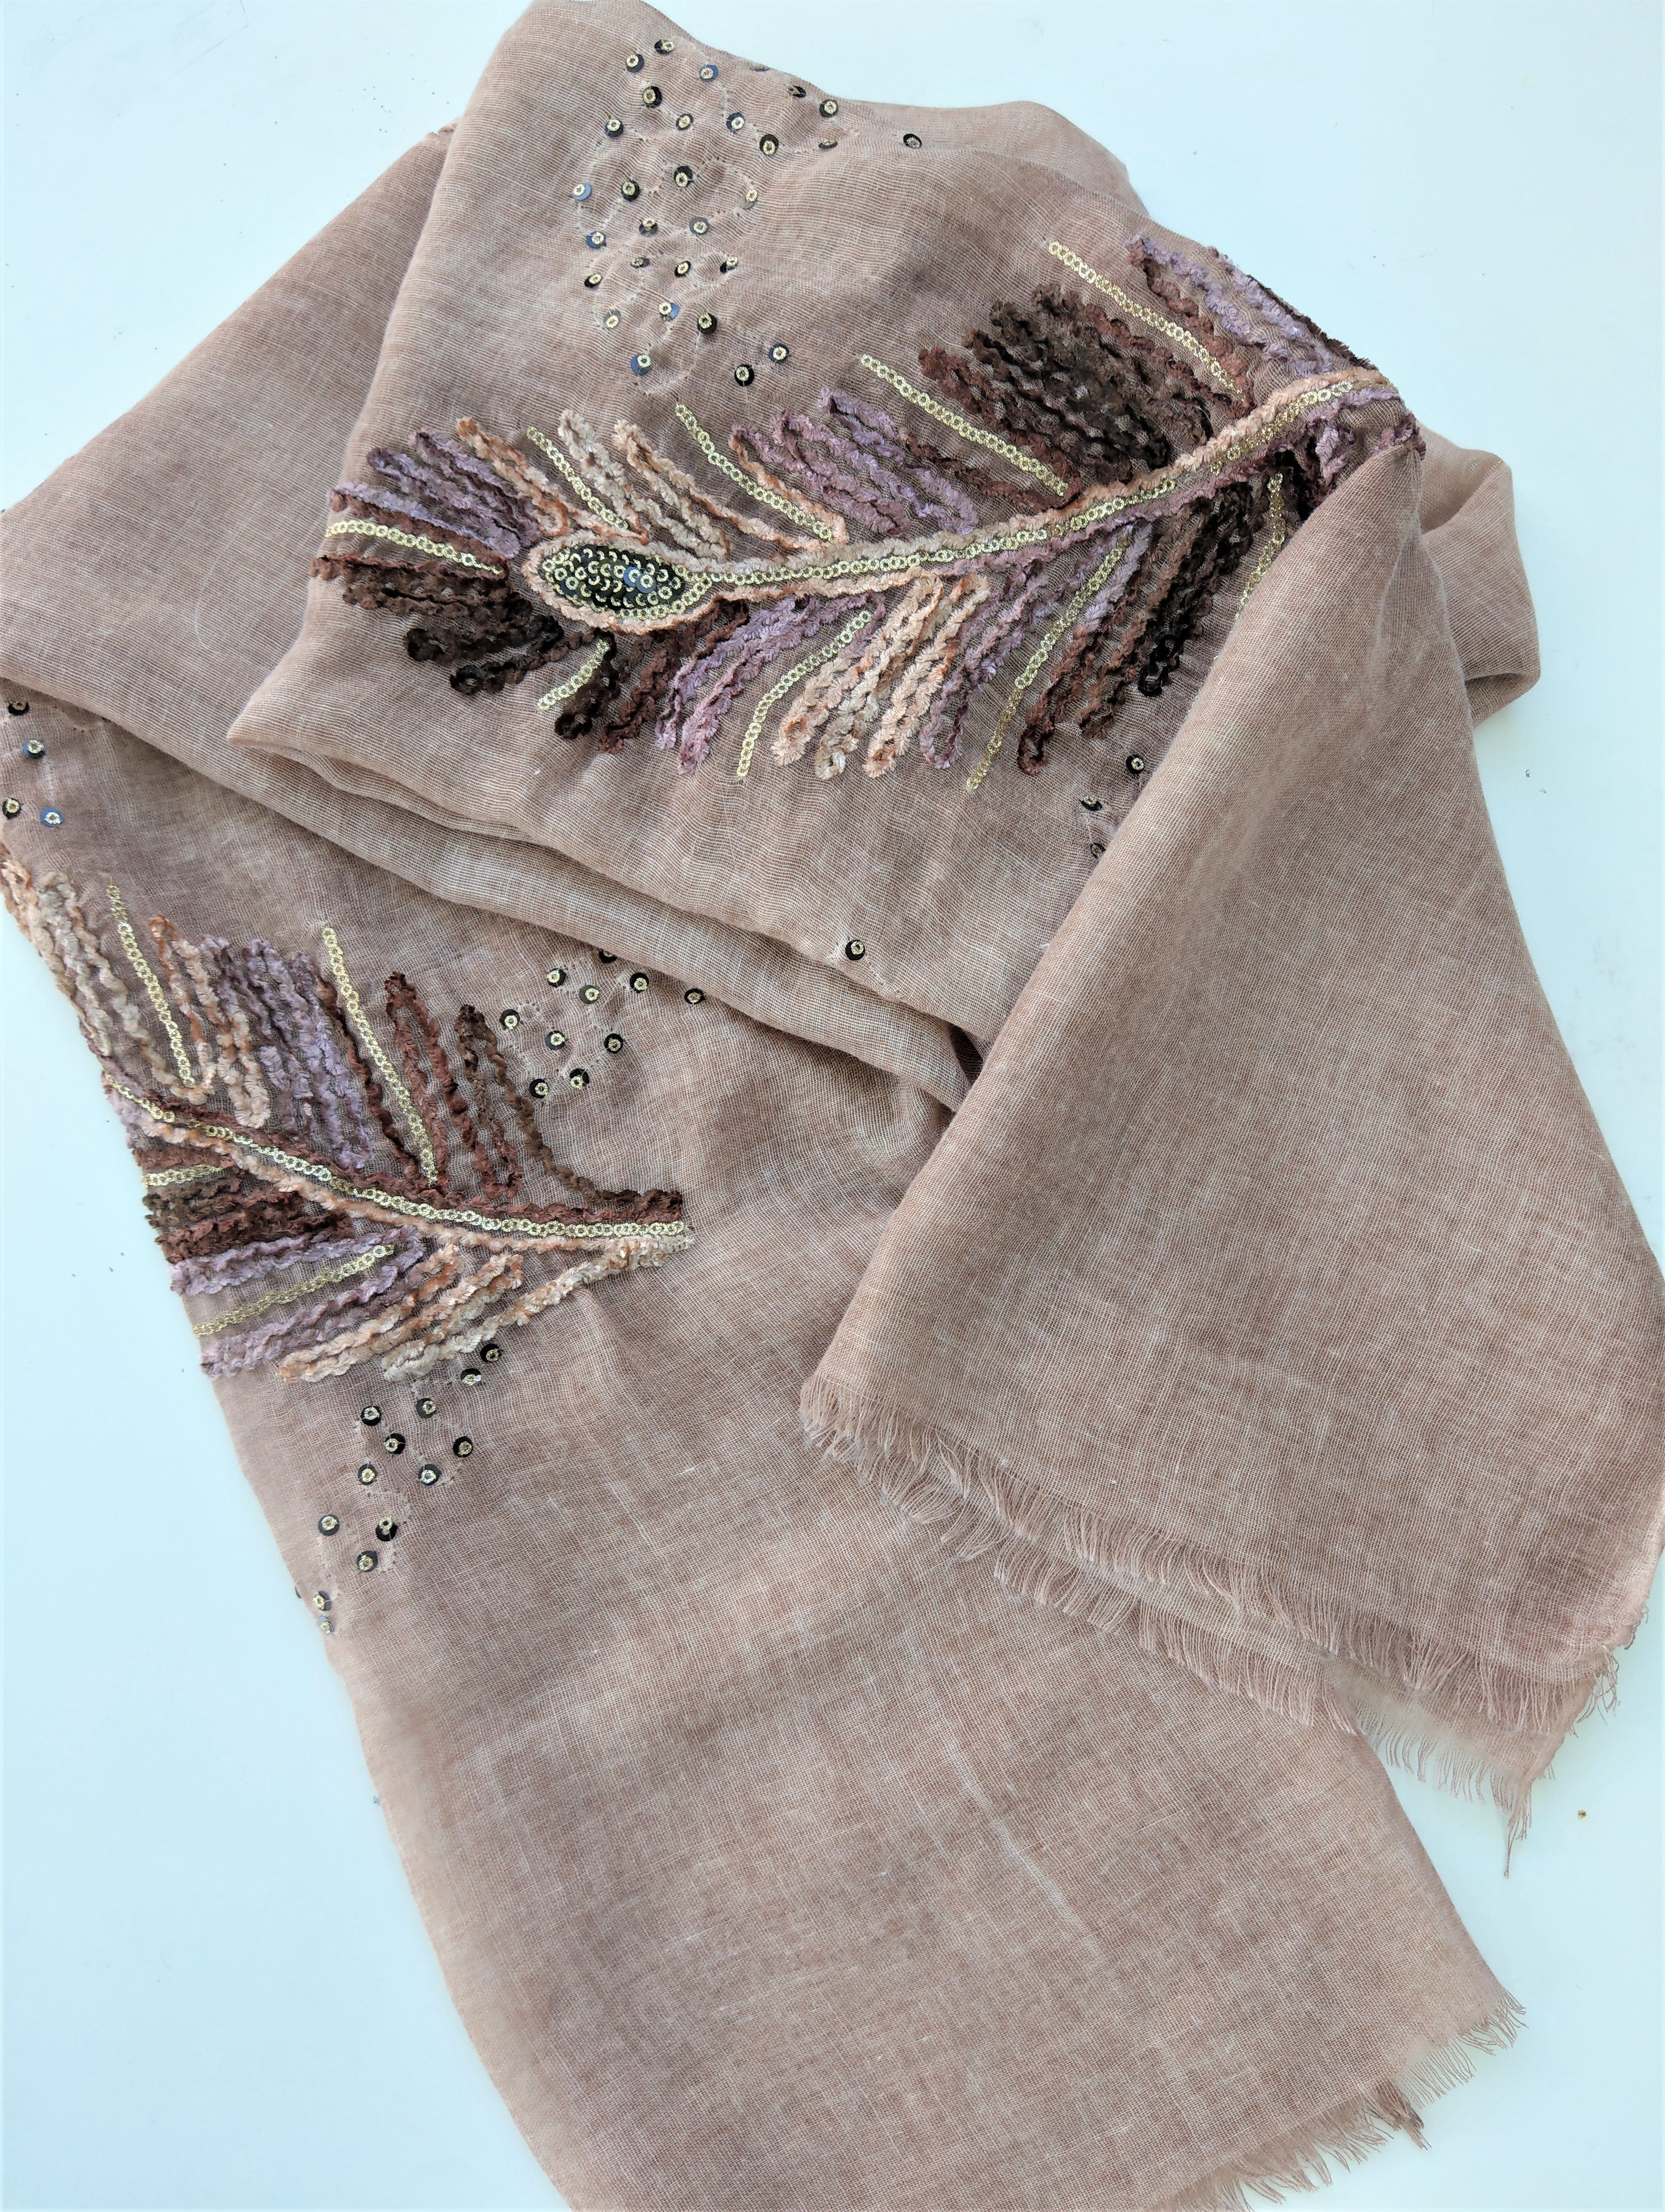 Embroidered  Scarf Soft Pink Dusty Pink Rusted Pink Hijab Headscarf Head Scarf Neck Shawl Stole Infinity Scarf Wrap Accessory Wave Woven